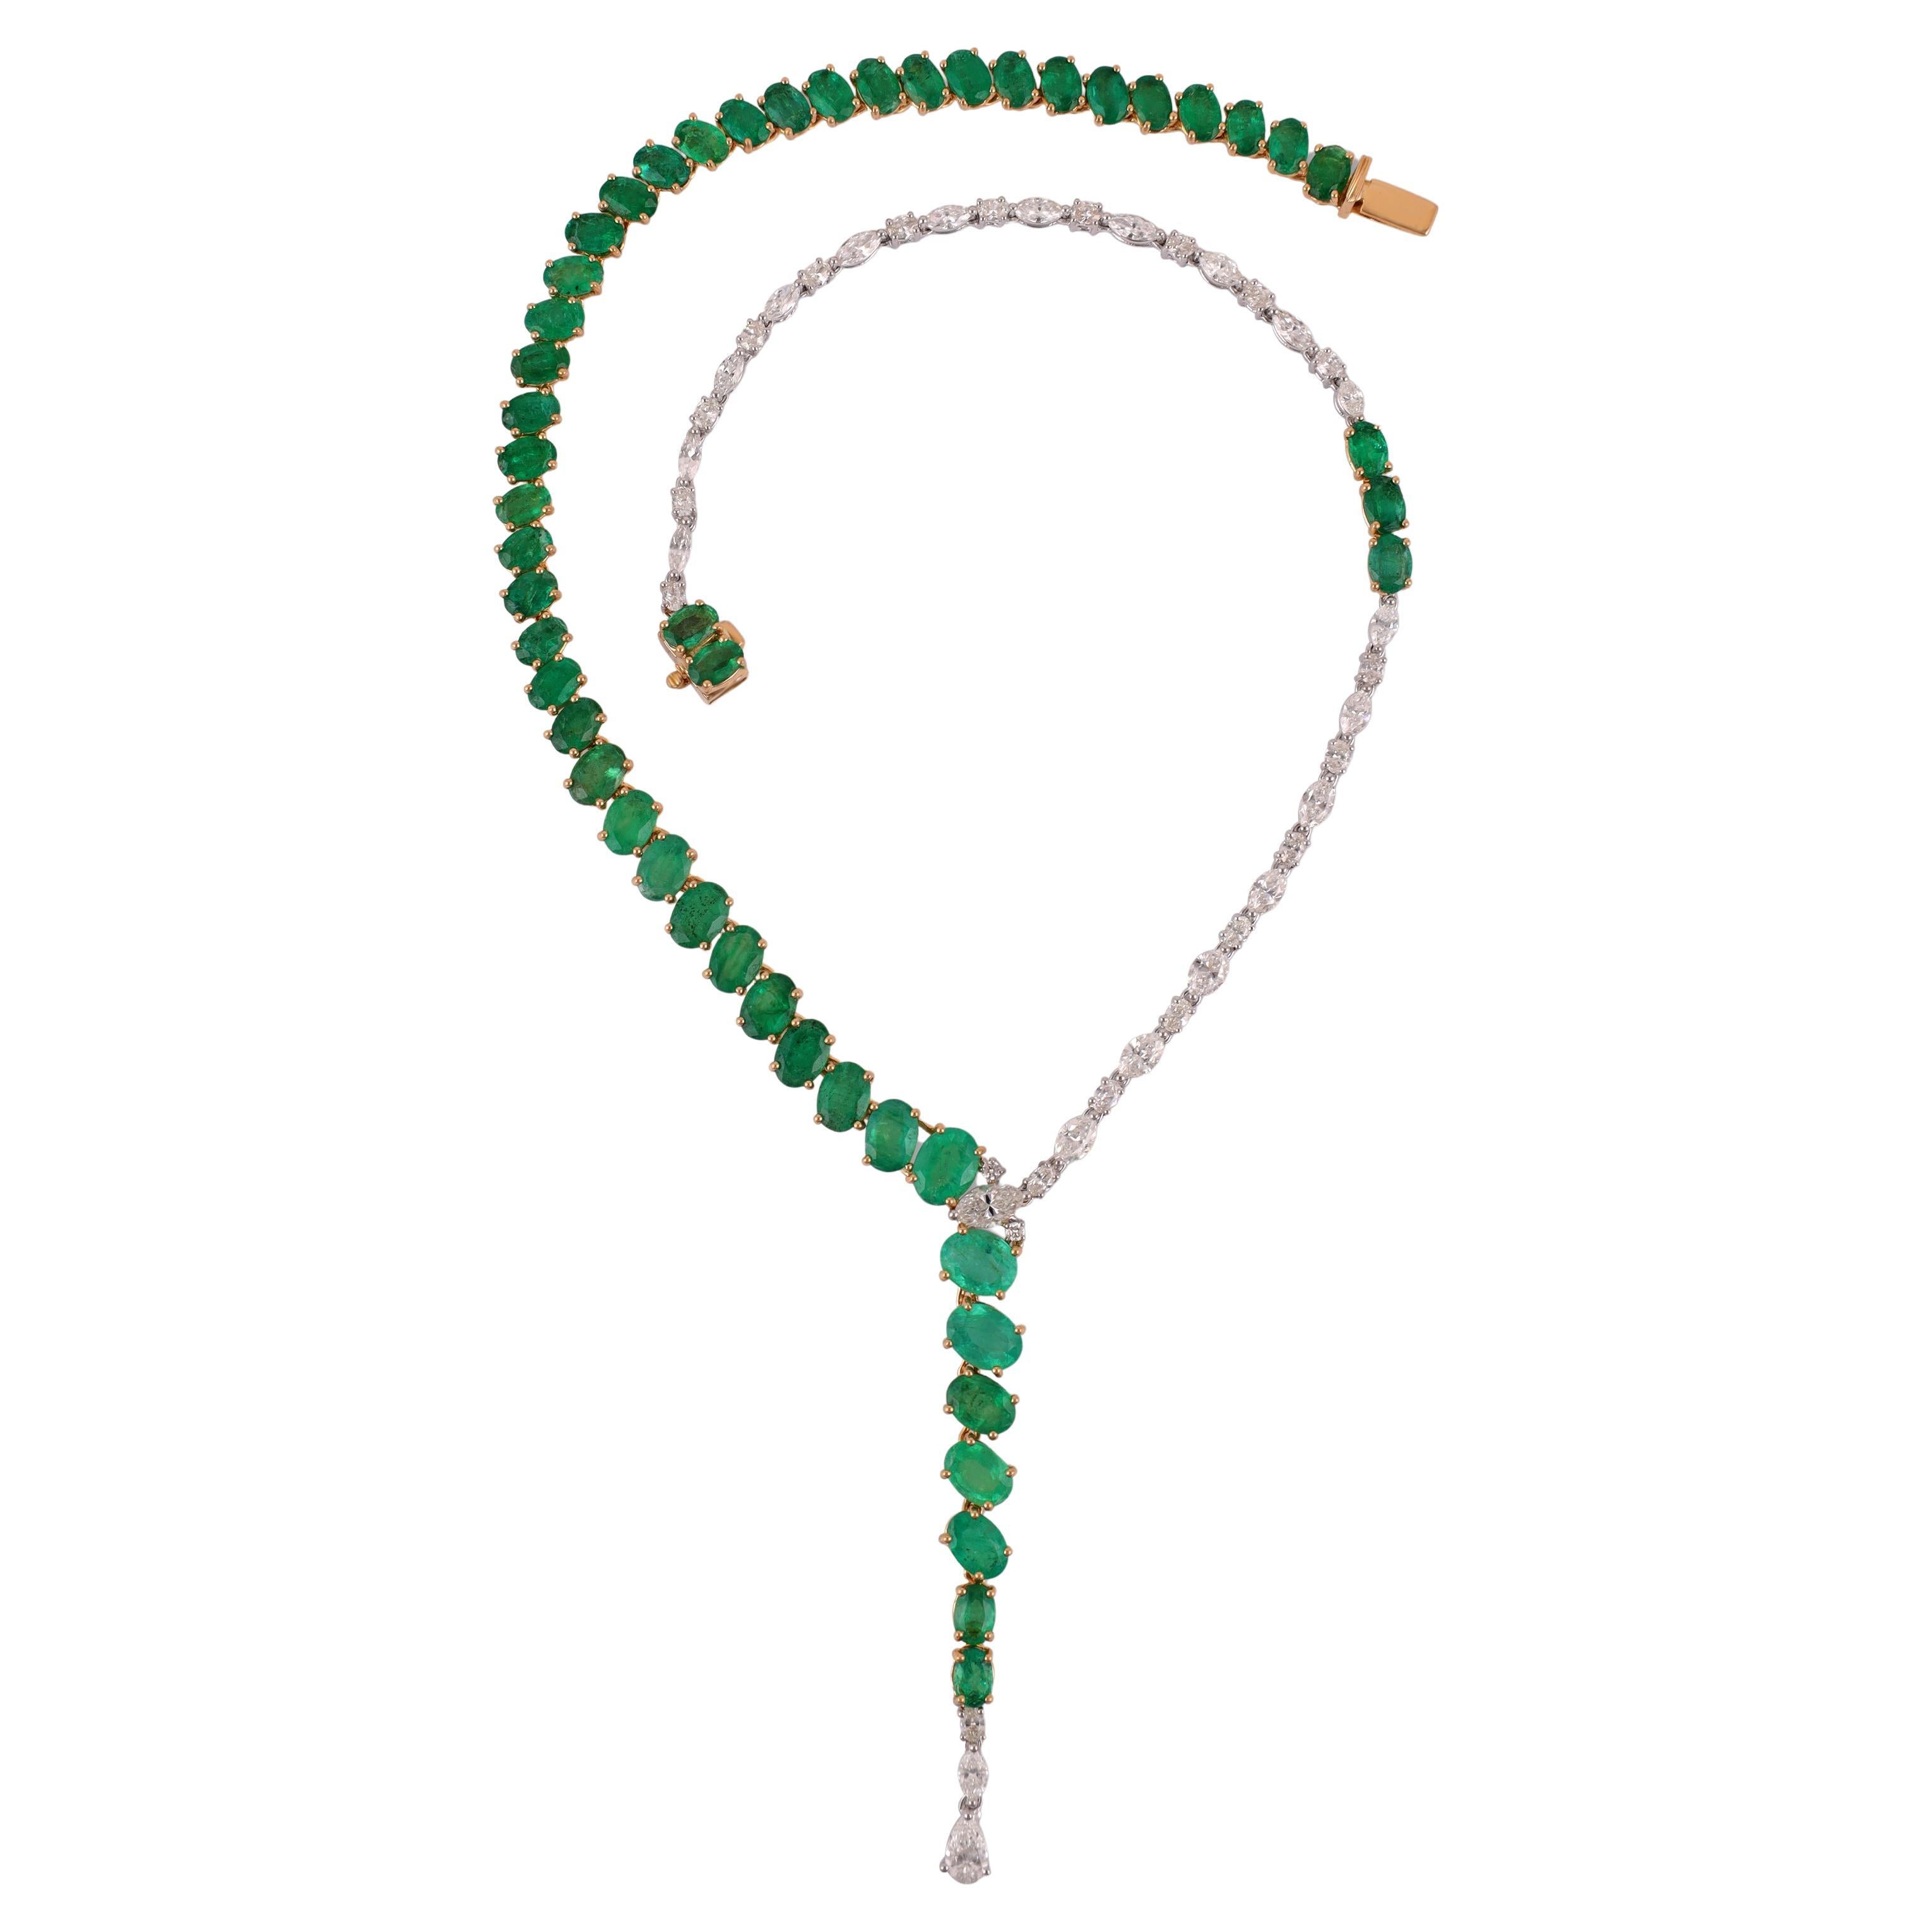 Magnificent 26.73 Carat Emerald & Diamond Necklace with Earrings For Sale